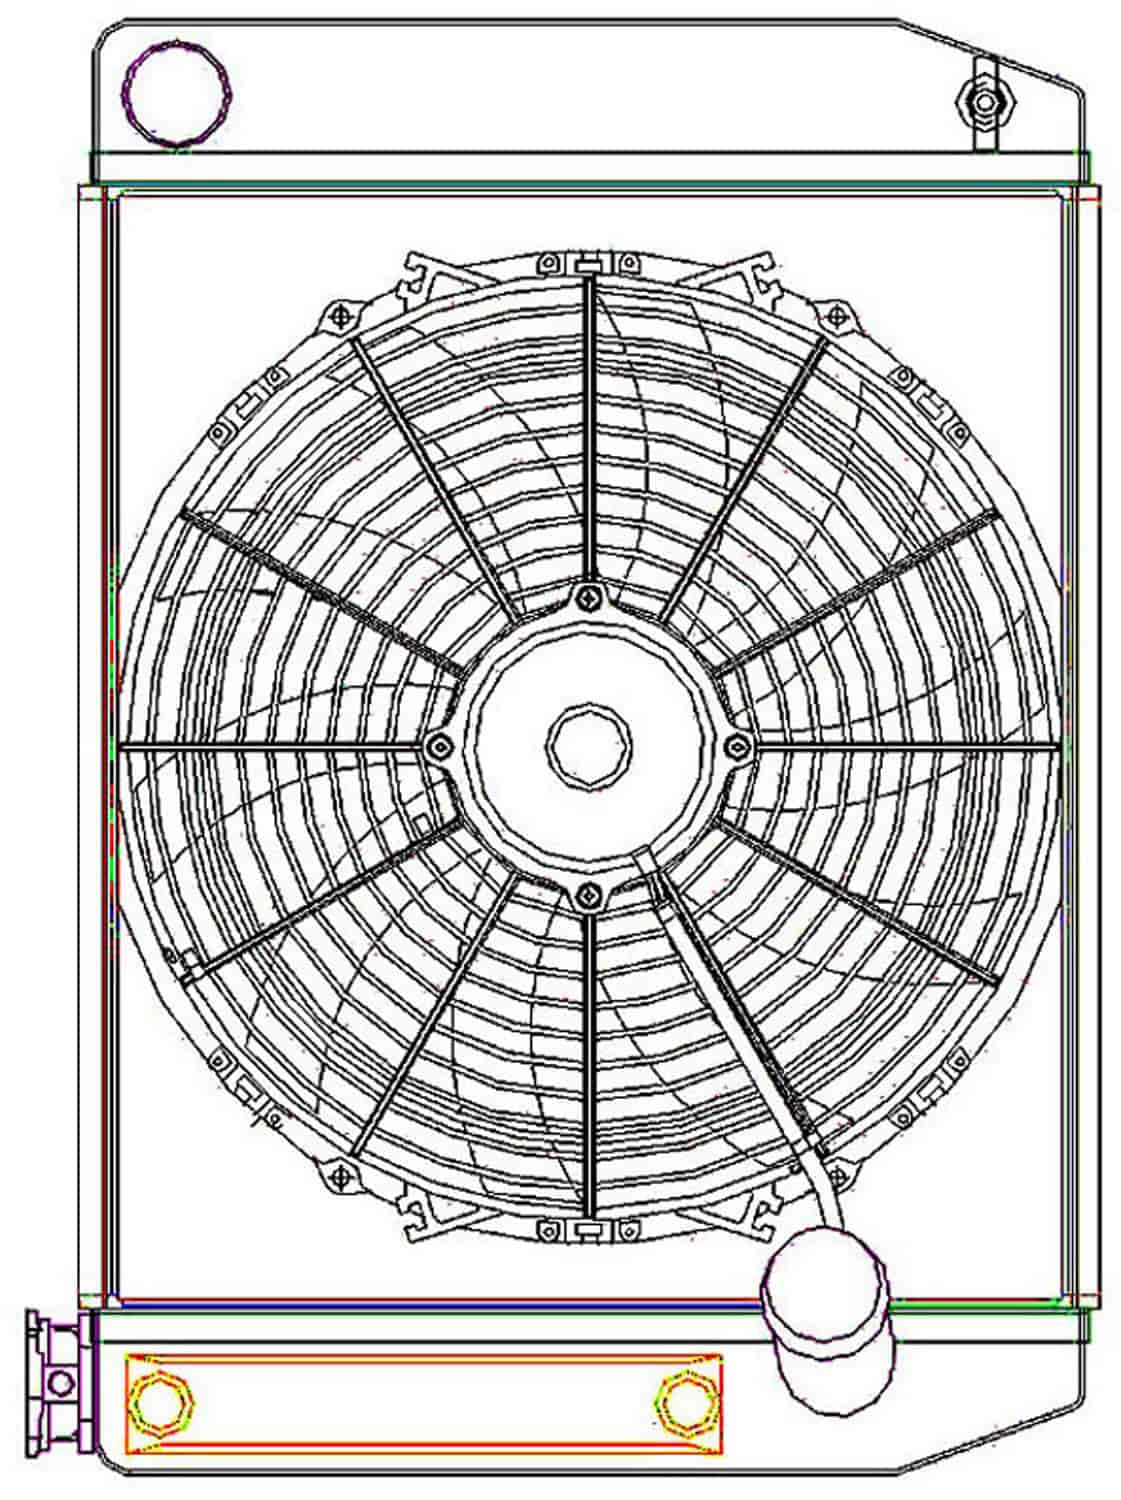 ClassicCool ComboUnit Universal Fit Radiator and Fan Single Pass Crossflow Design 22" x 15.50" with Transmission Cooler